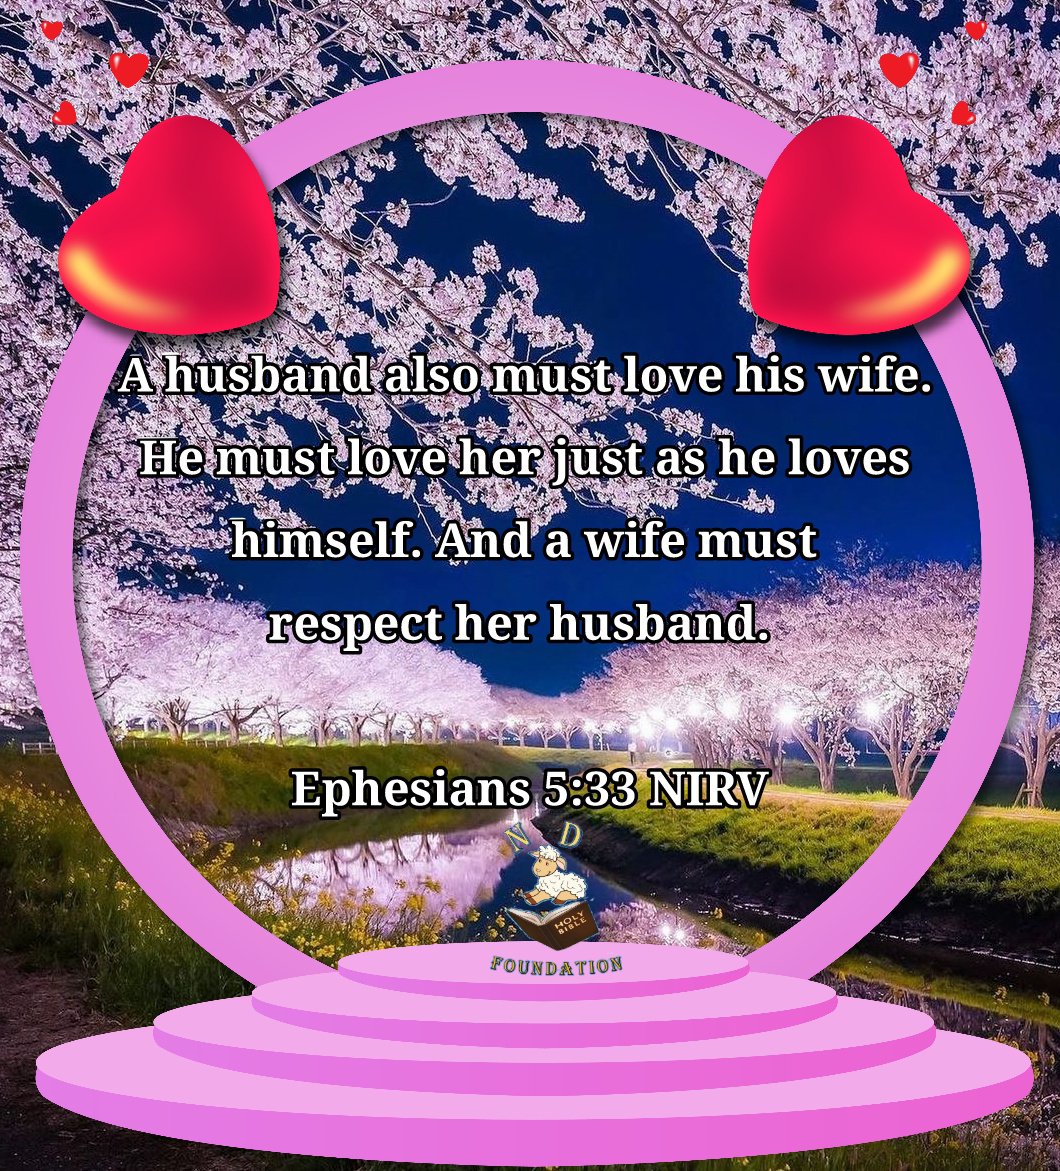 A husband also must love his wife. He must love her just as he loves himself. And a wife must respect her husband. Ephesians 5:33 NIRV